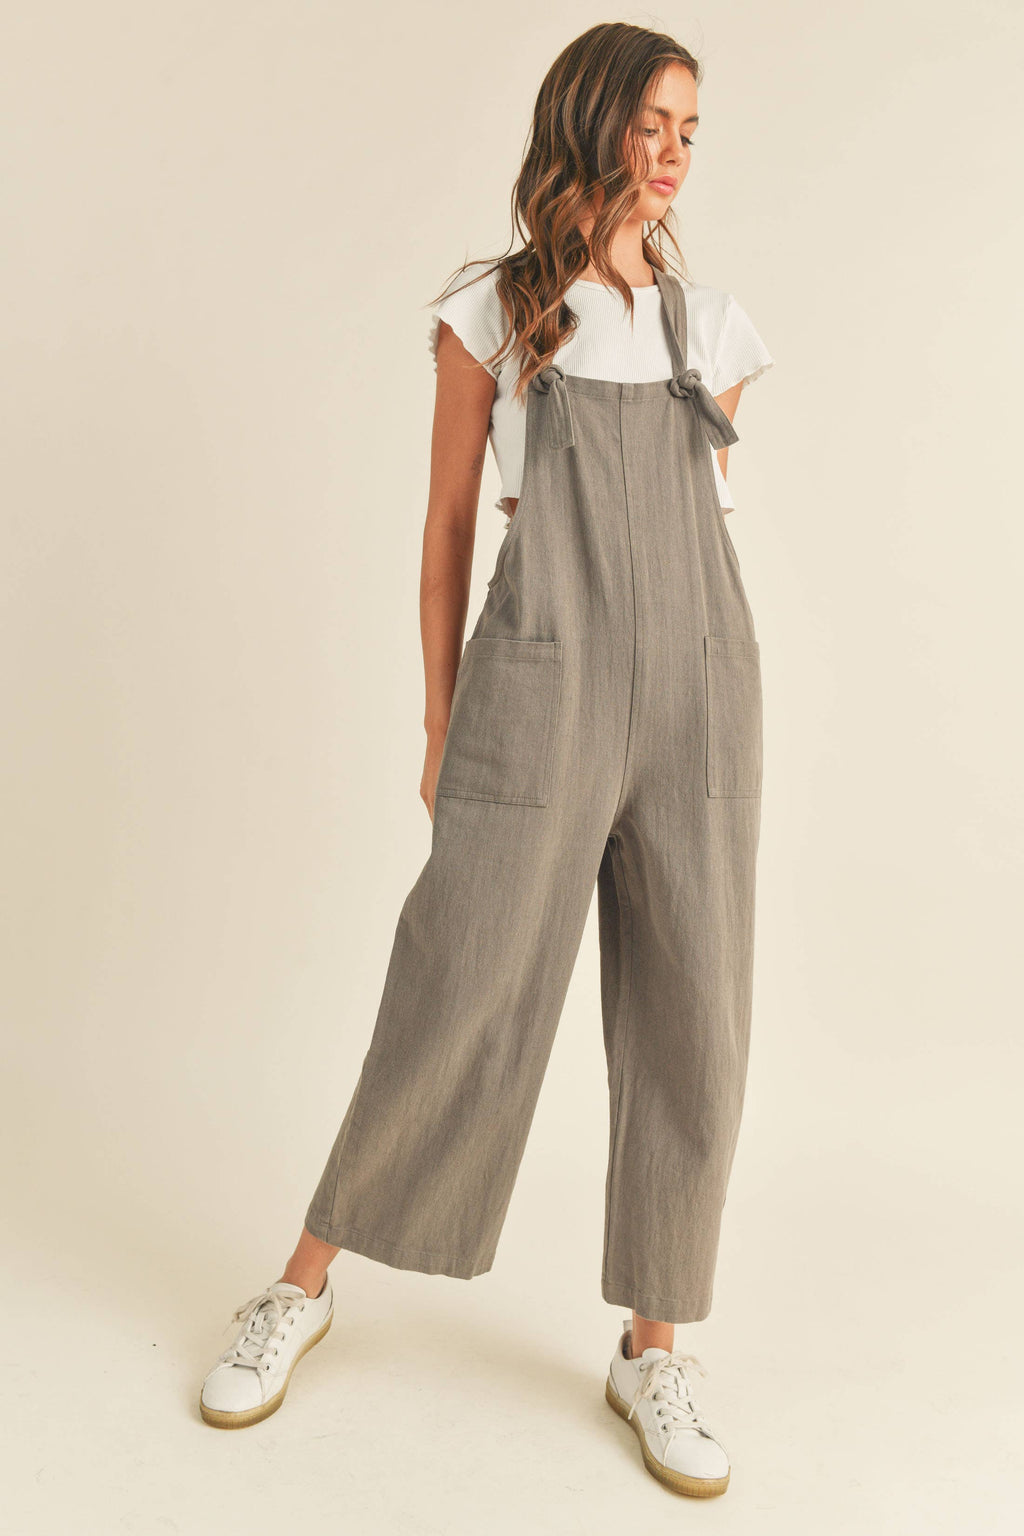 The Summer Collection 2020  Jumpsuit with sleeves, Lightweight jumpsuit, Cotton  jumpsuit